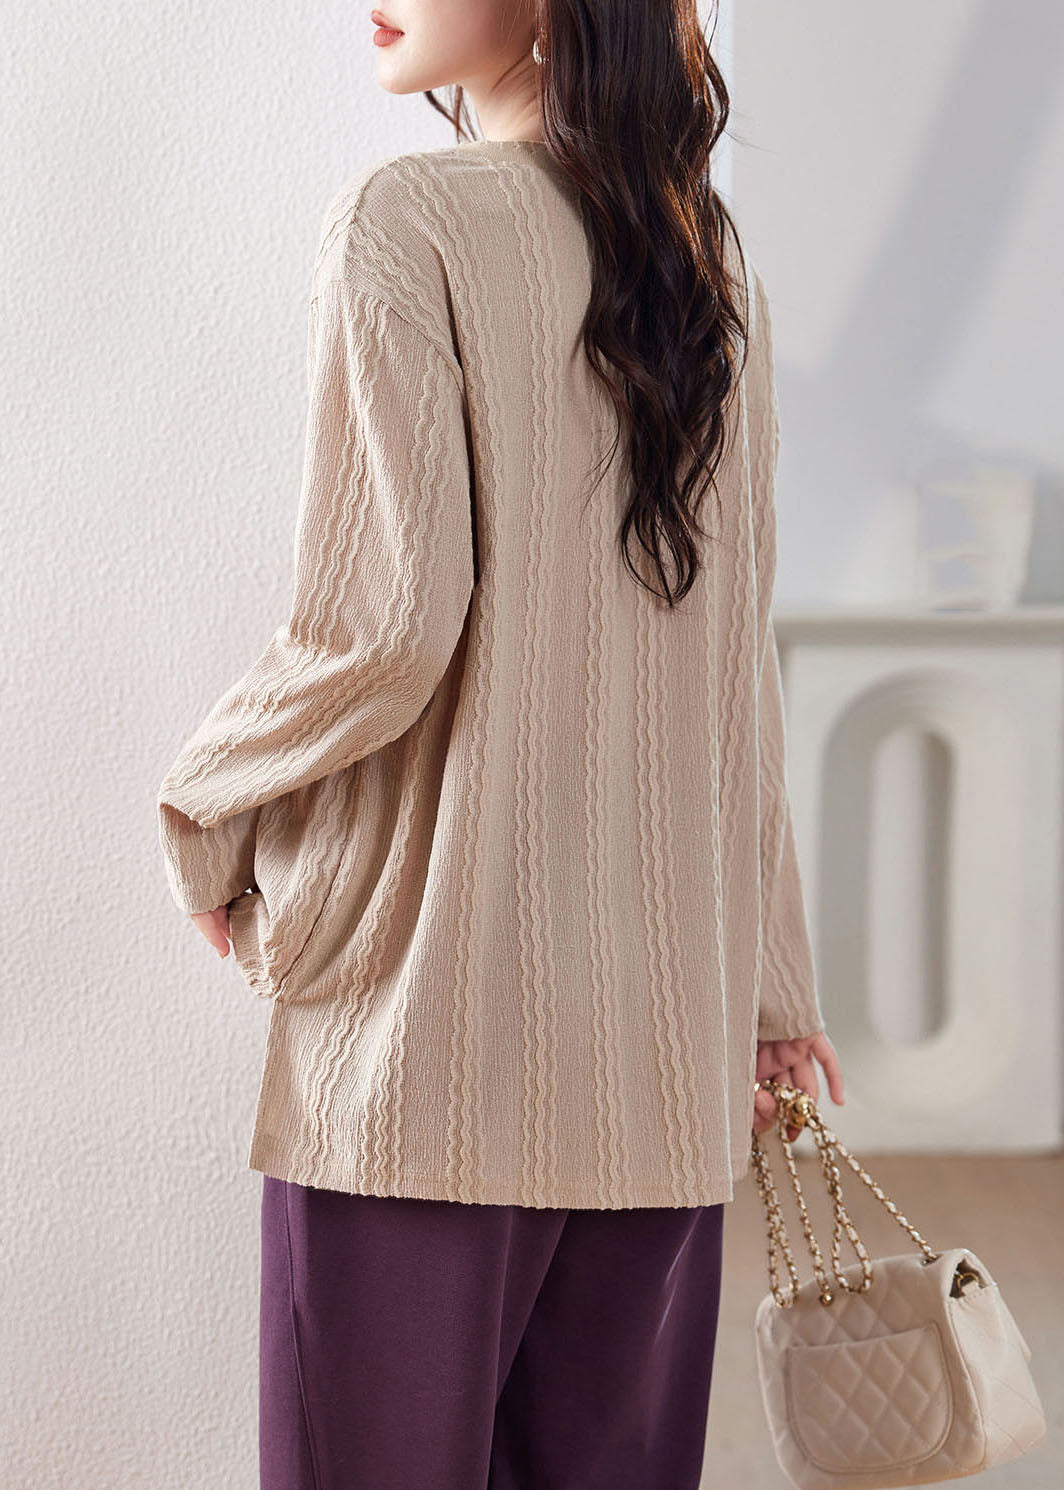 Chic Apricot Print Patchwork Low High Design Tops Long Sleeve